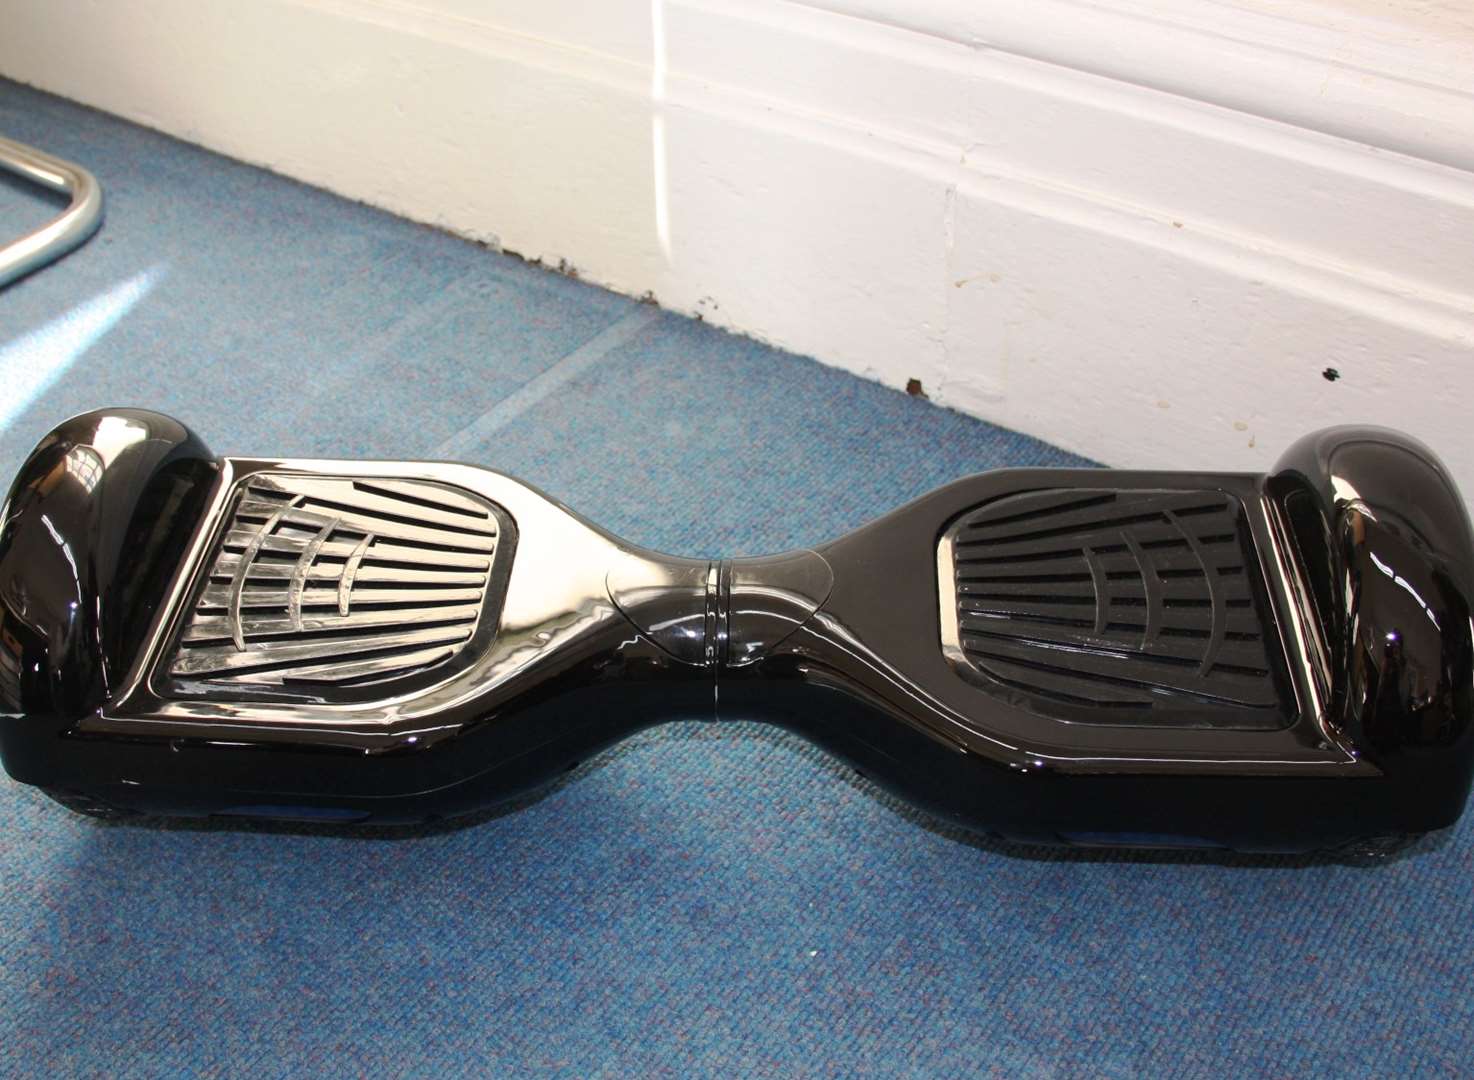 Knock-off hoverboard warning after toy bursts into flames